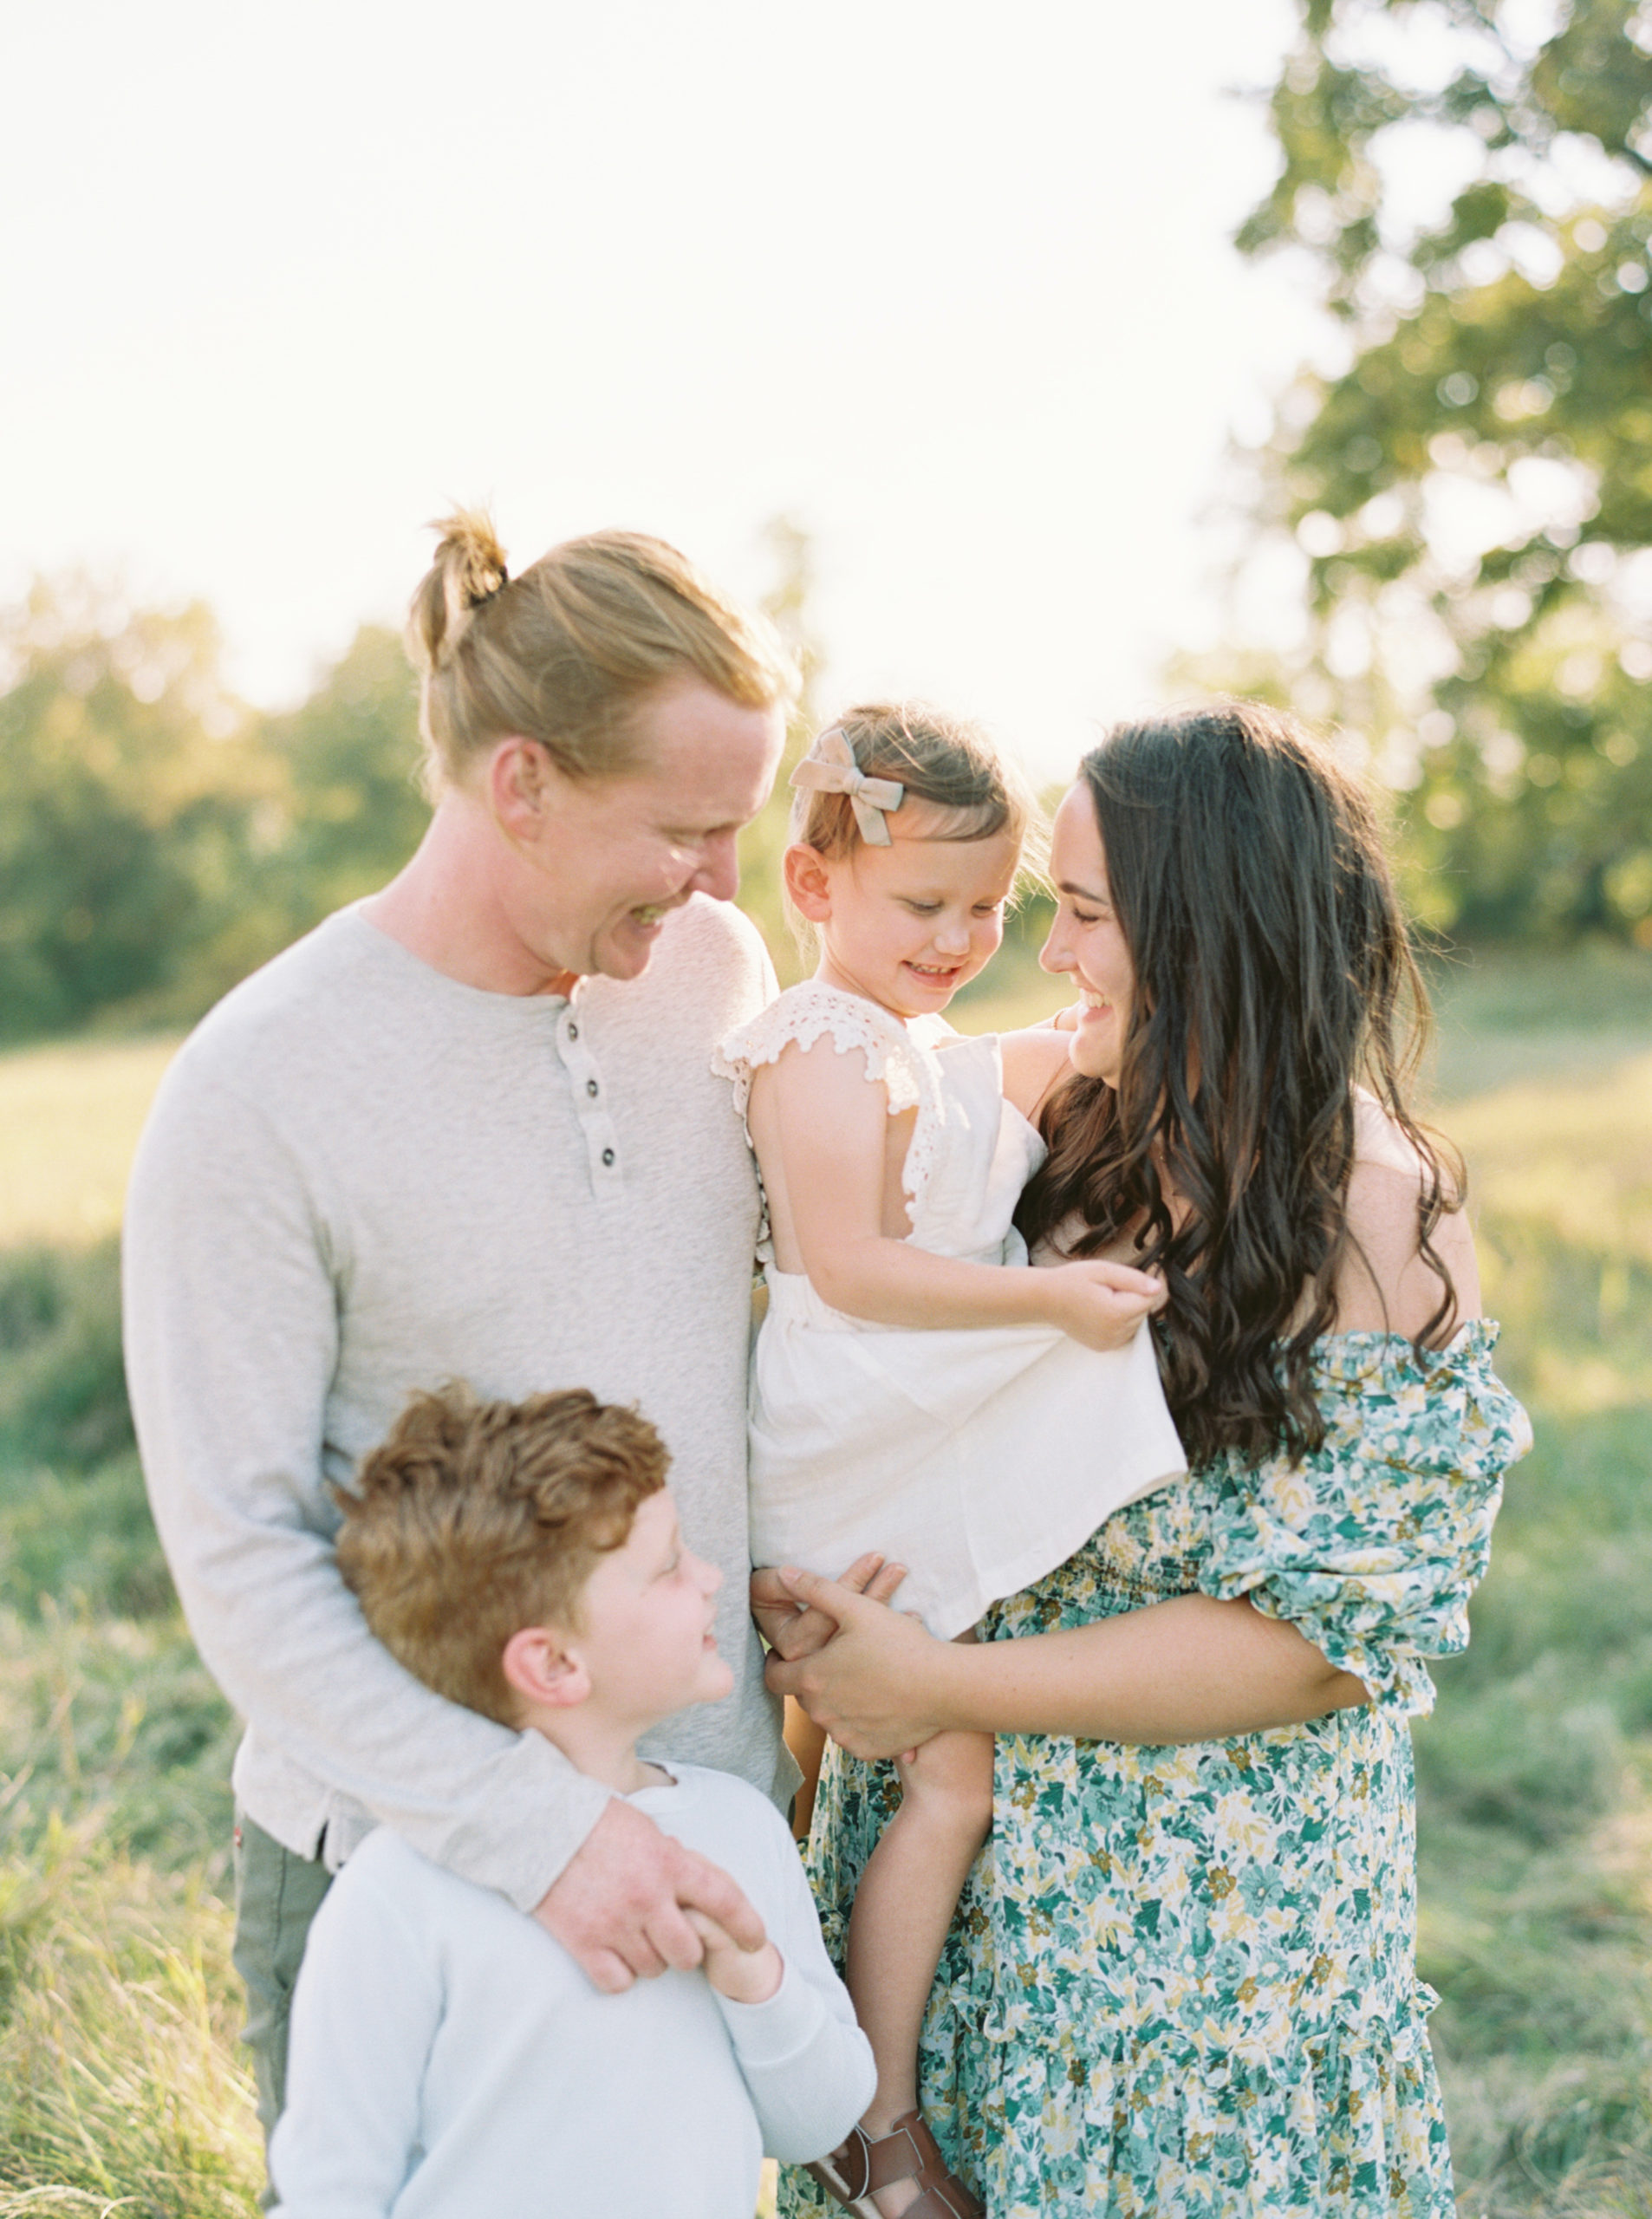 family portrait in a grassy green field setting in Shorewood in the summer